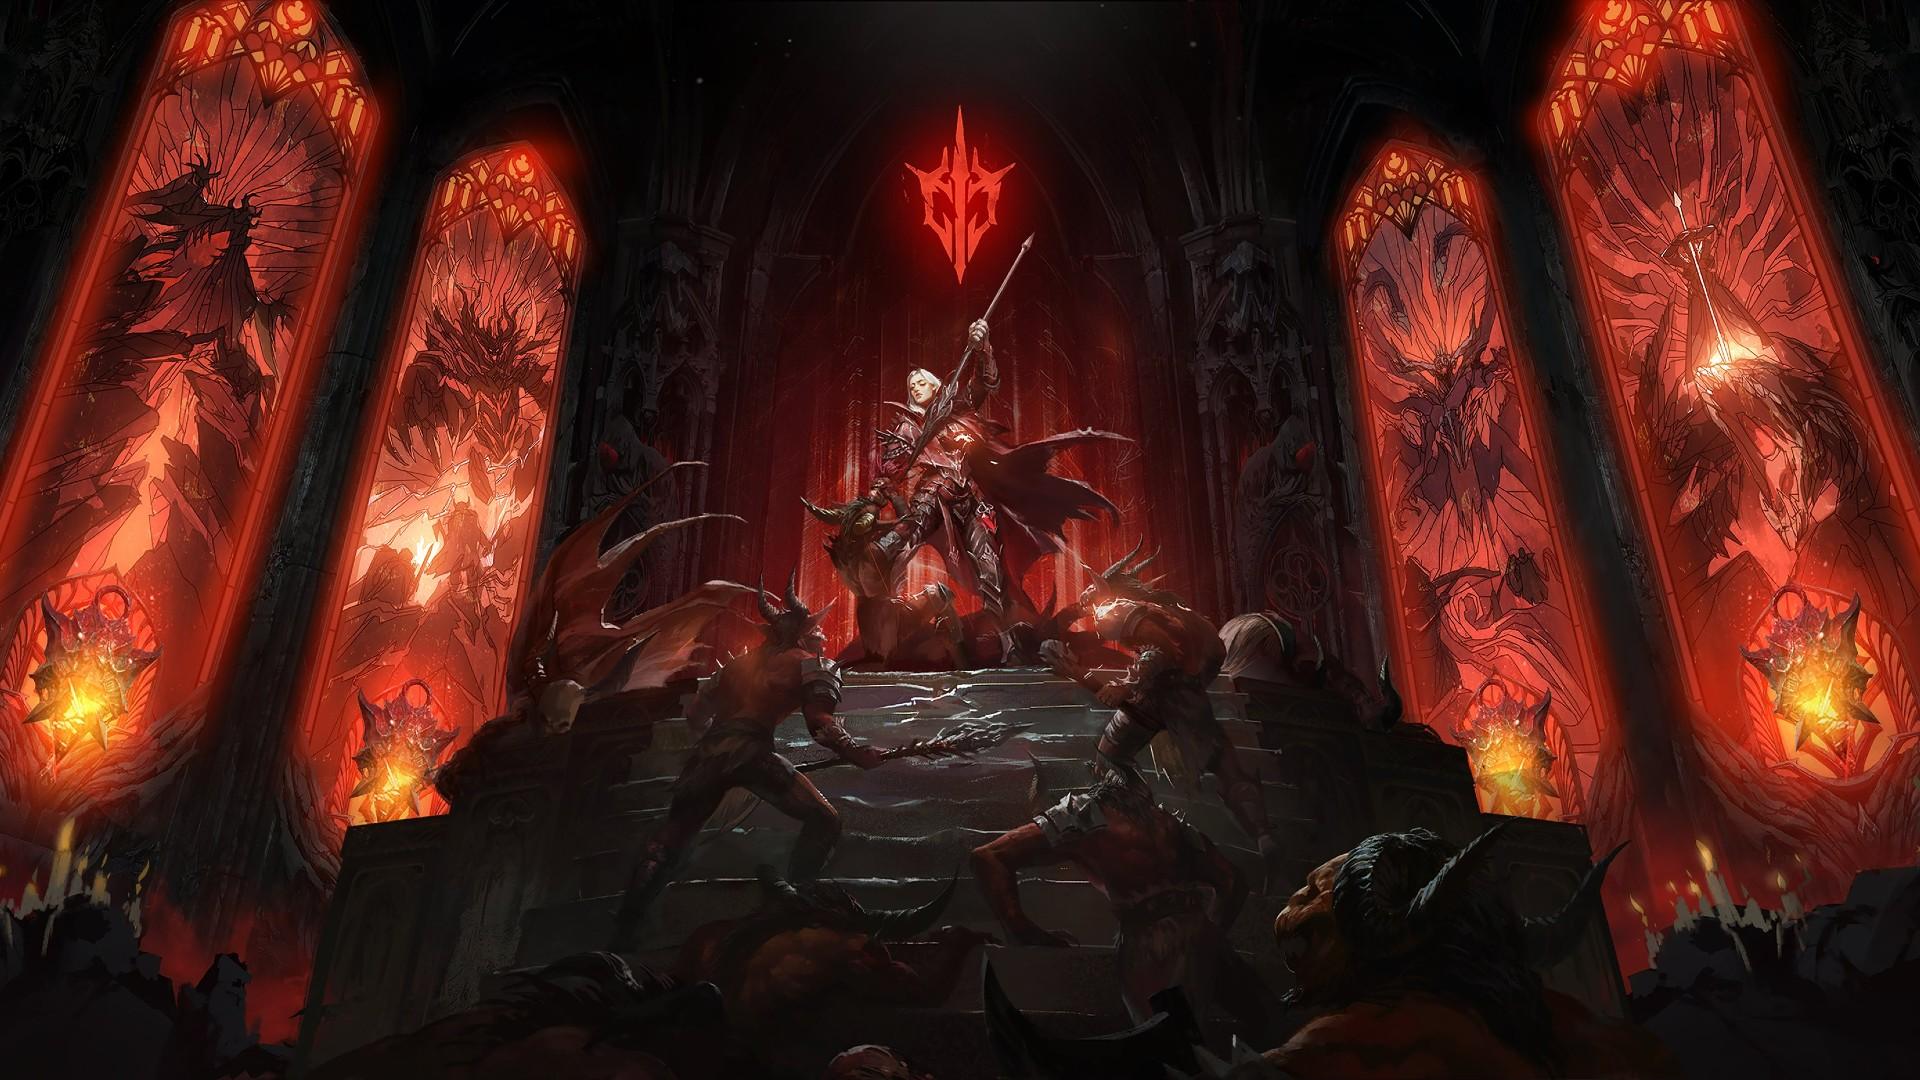 Introducing the Newest Diablo Immortal Class: Blood Knight